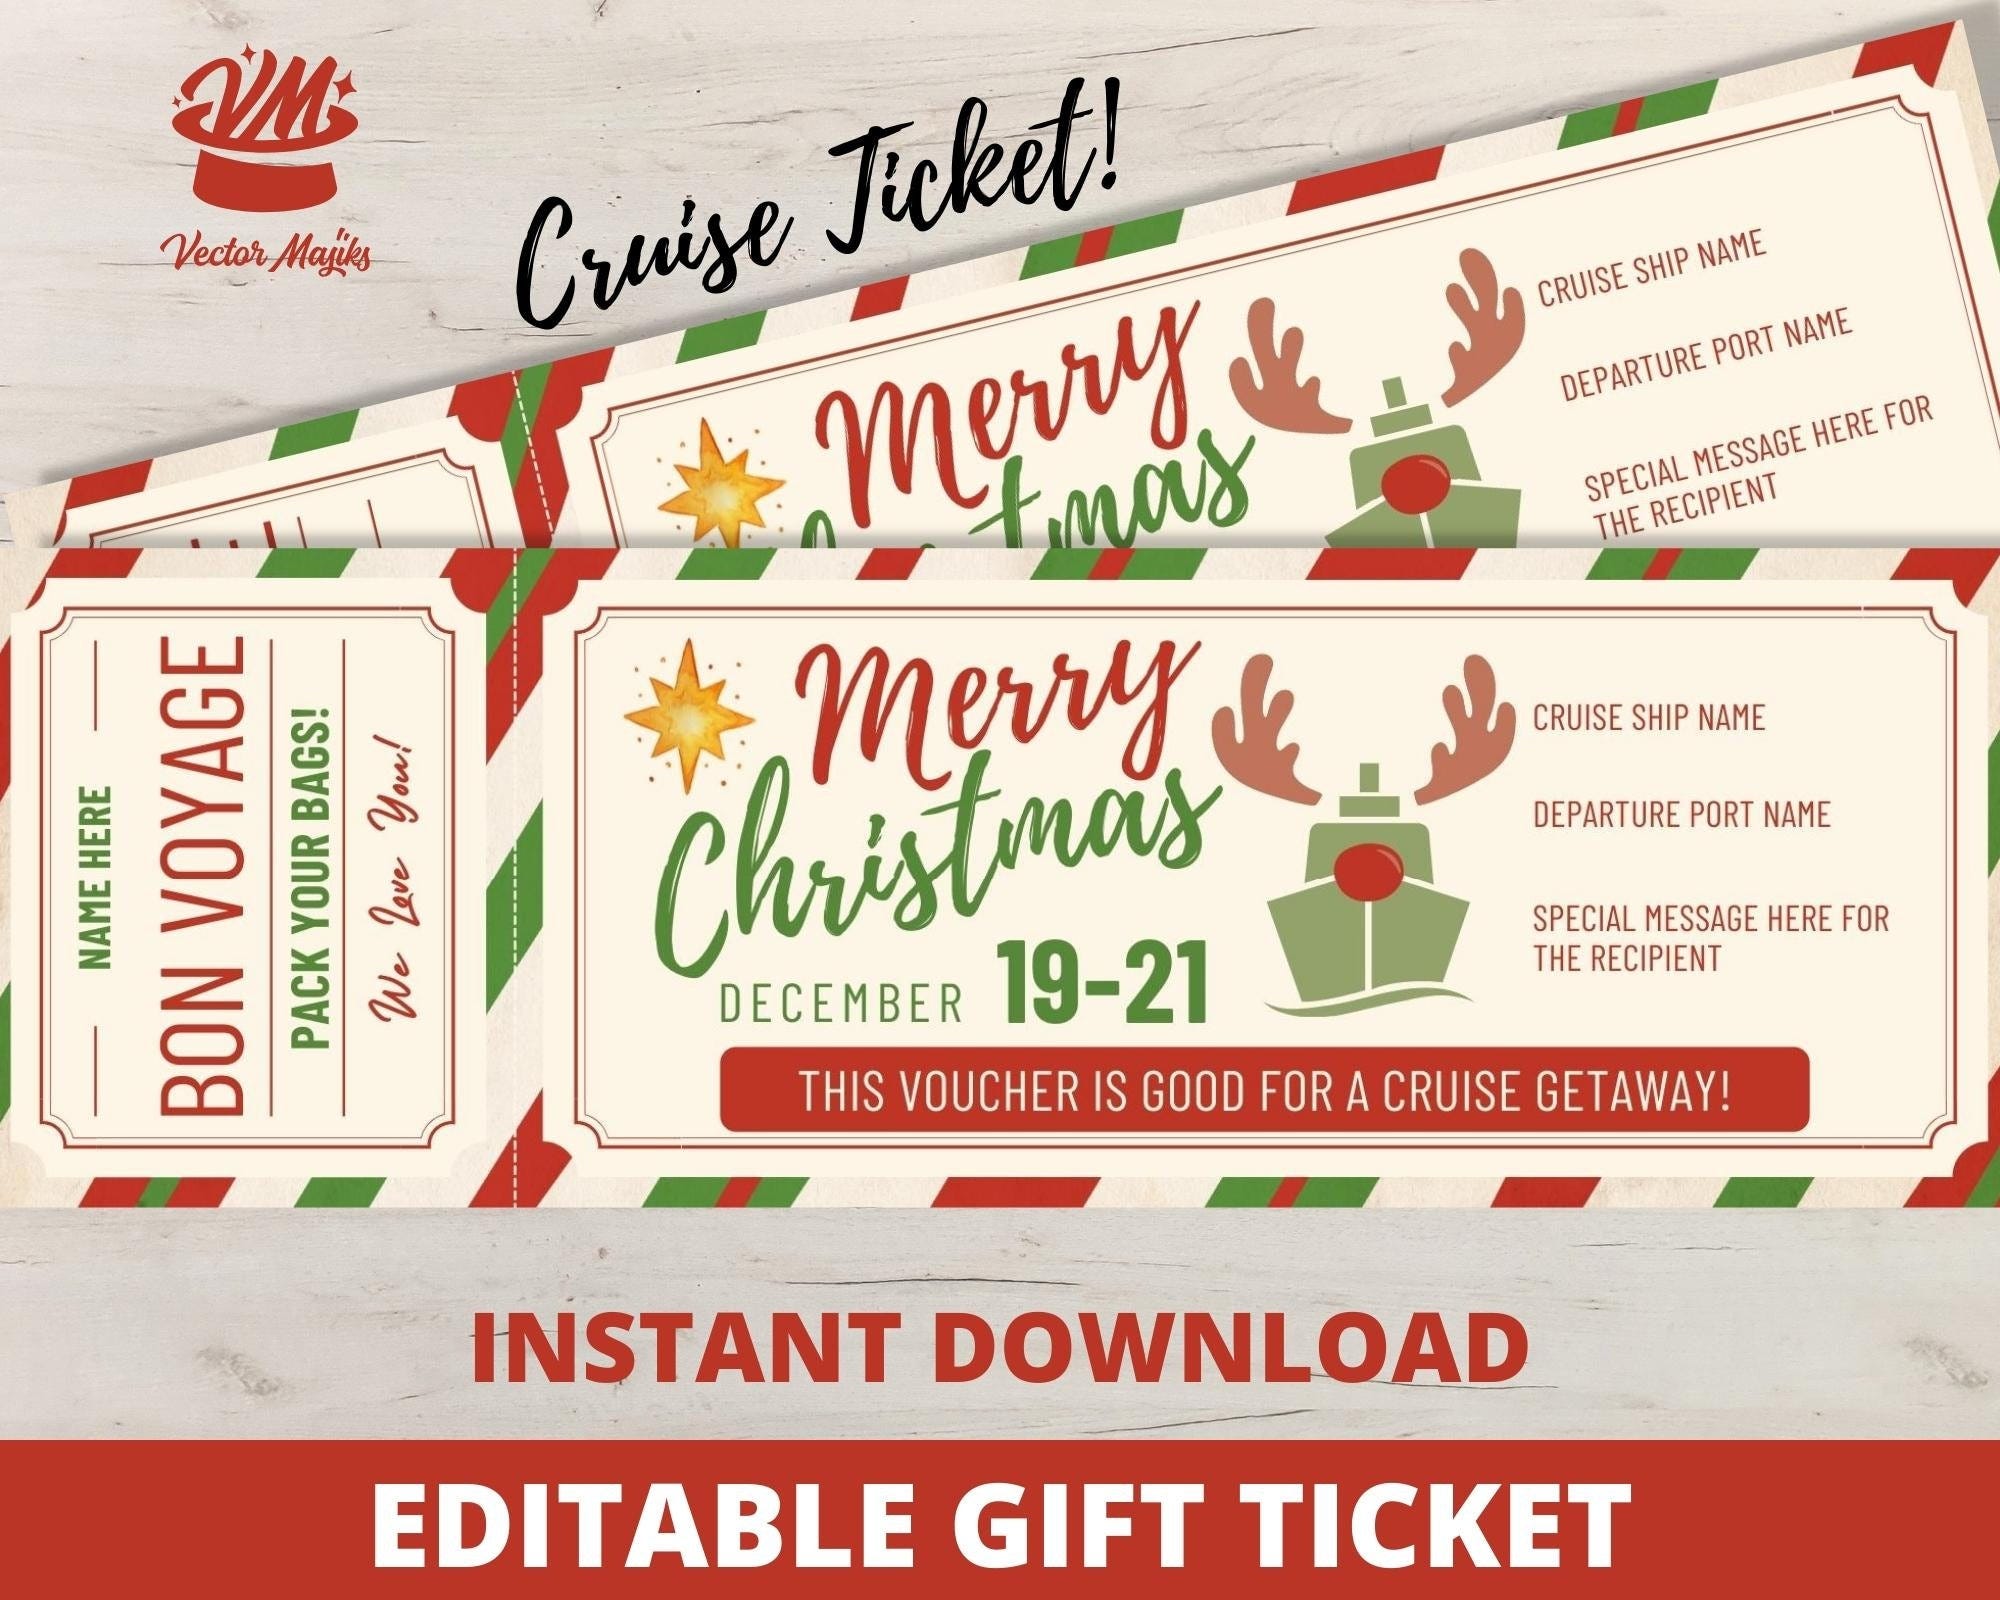 Christmas Cruise Trip Surprise Ticket - Cruise Gift Voucher - Cruise Certificate Template